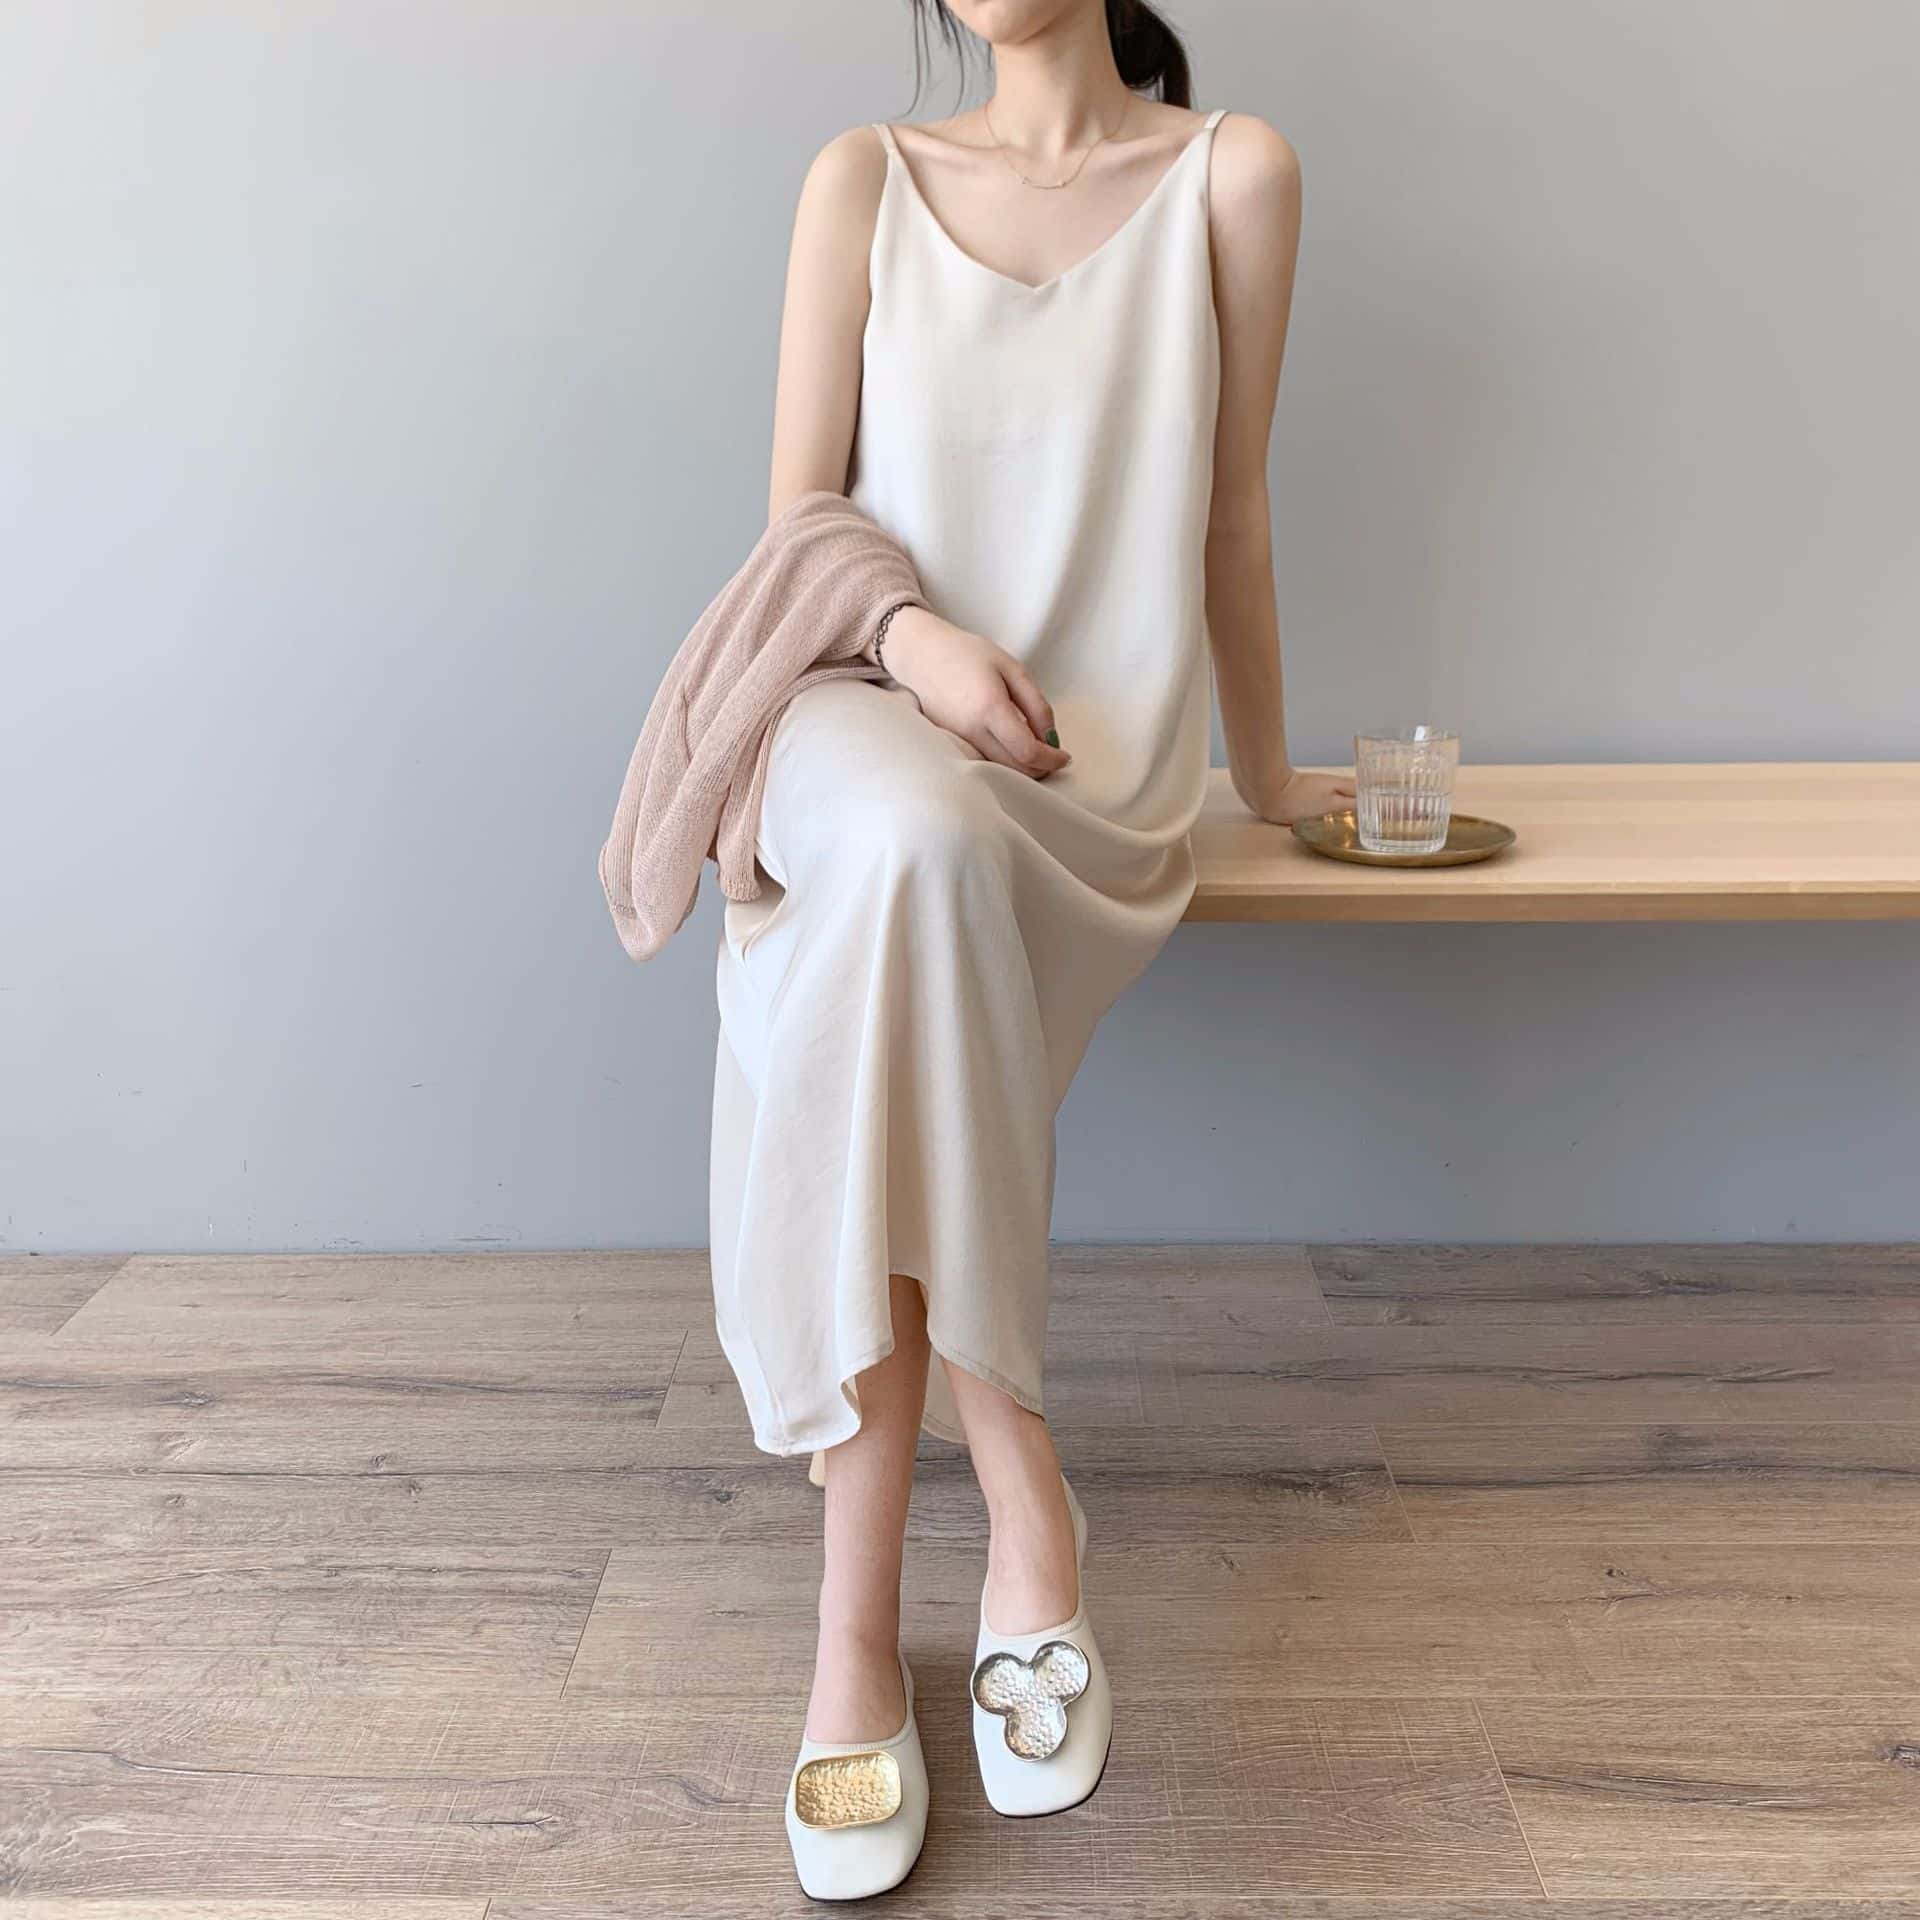 Spring summer 2022 Woman Tank Dress Casual Satin Sexy Camisole Elastic Female Home Beach Dresses v-neck camis sexy dress